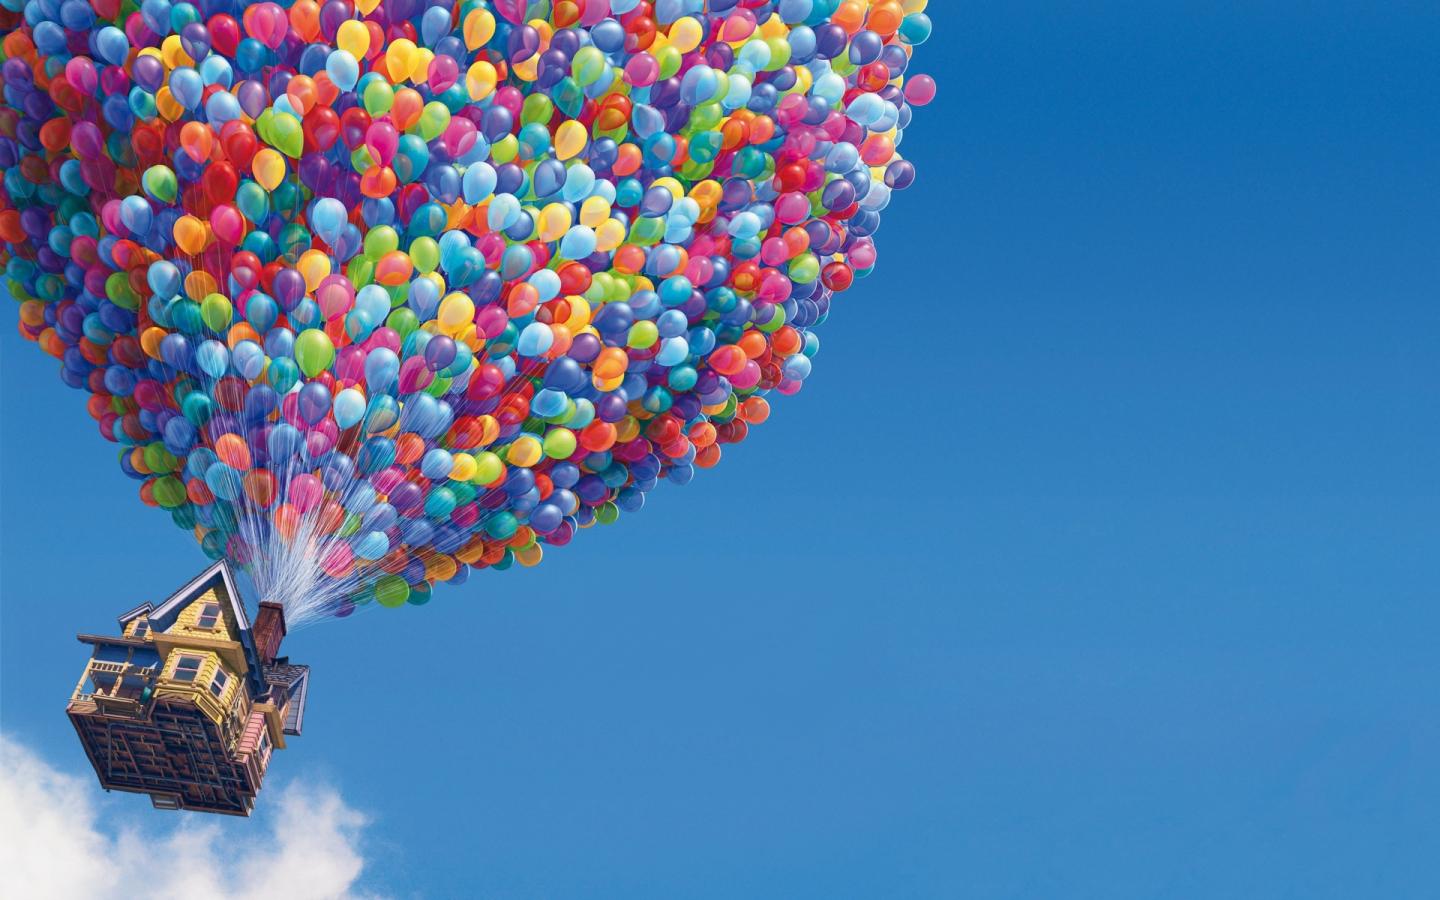 Up Pixar Animation HD Wallpapers Download Free Wallpapers in HD